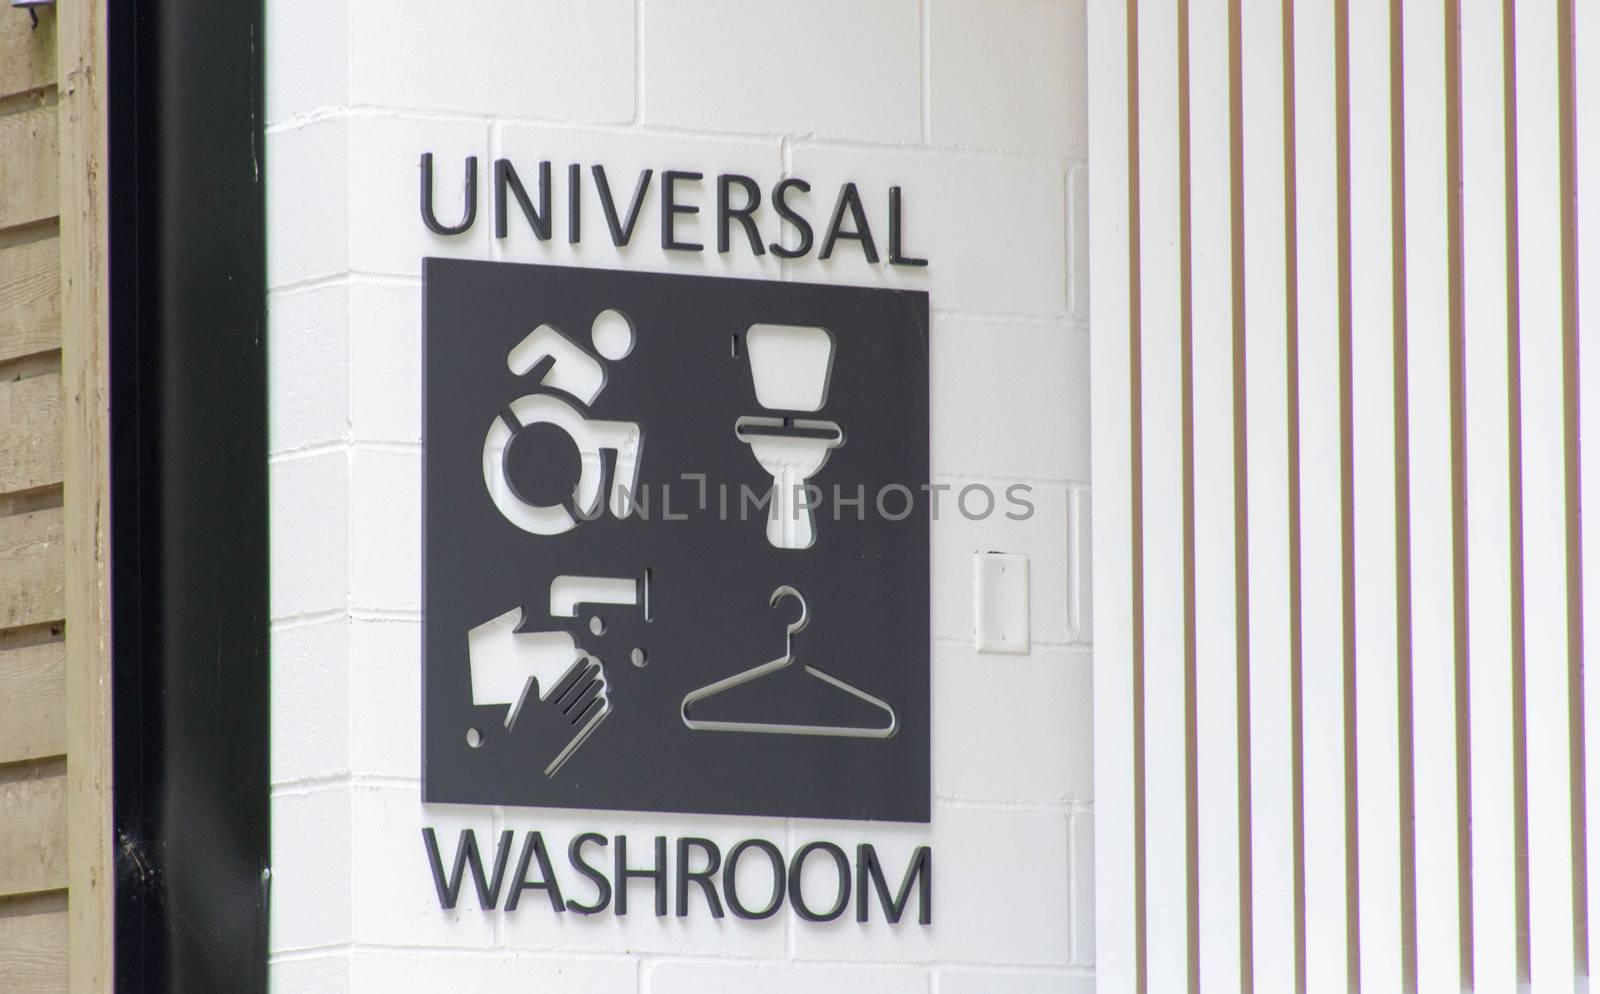 Universal bathroom or washroom sign in a public park in Canada.  by kingmaphotos